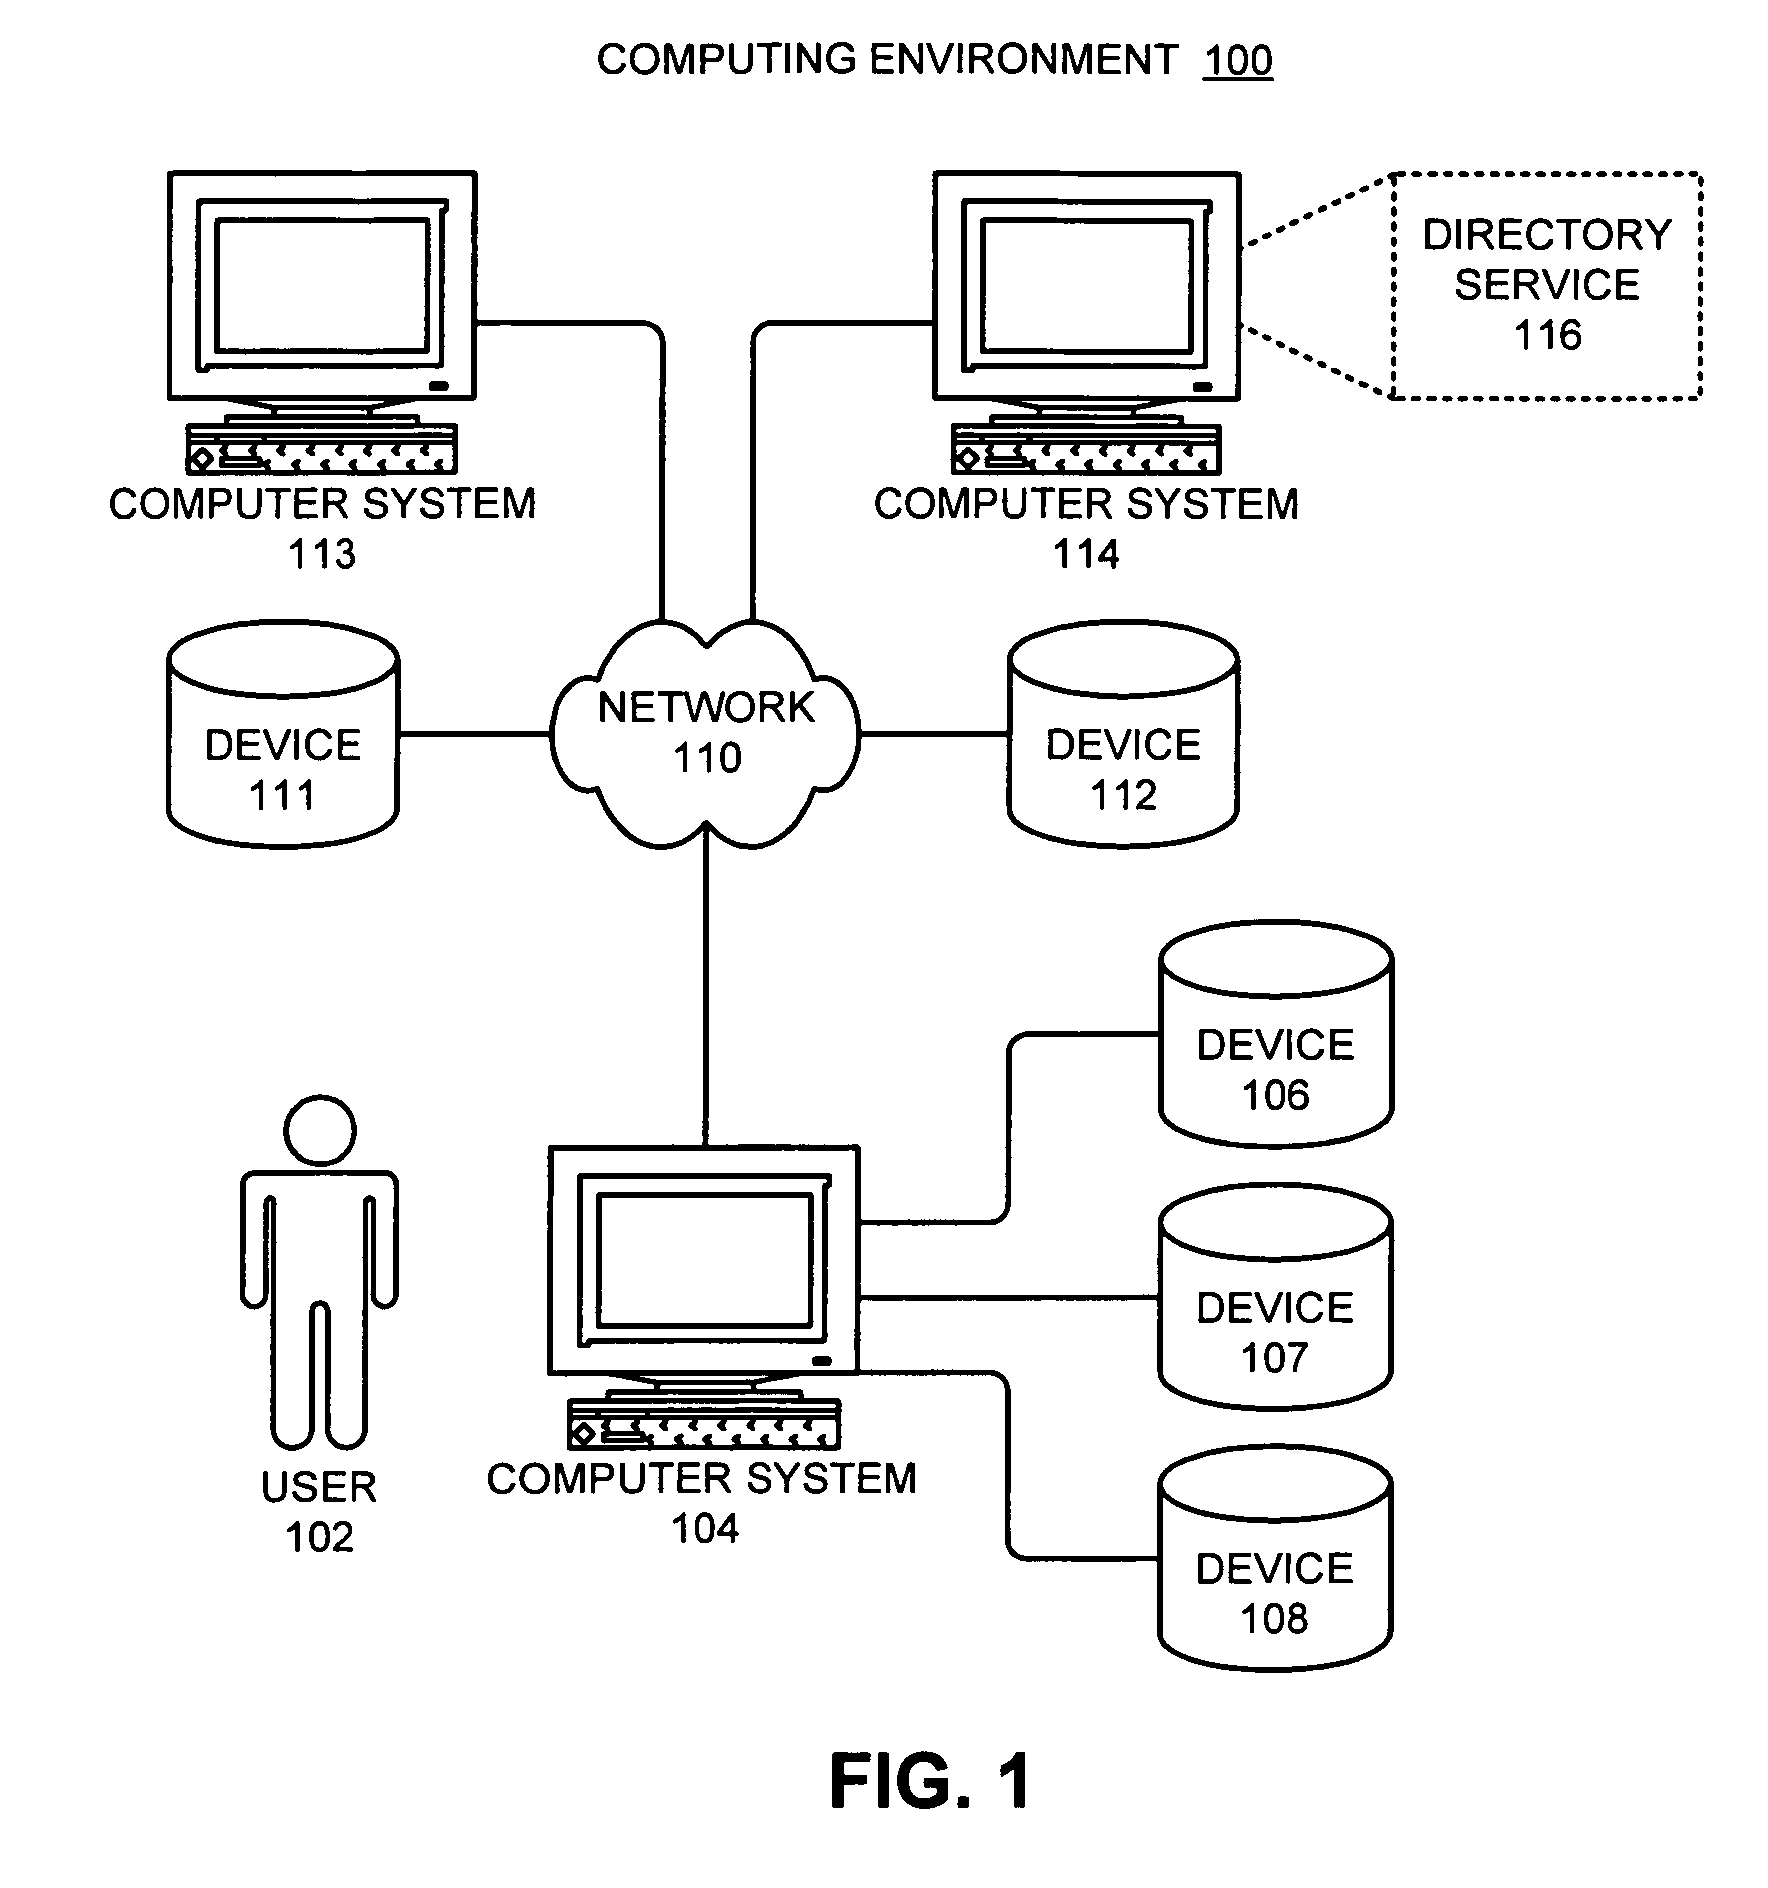 Method and apparatus for using a directory service to facilitate centralized device naming